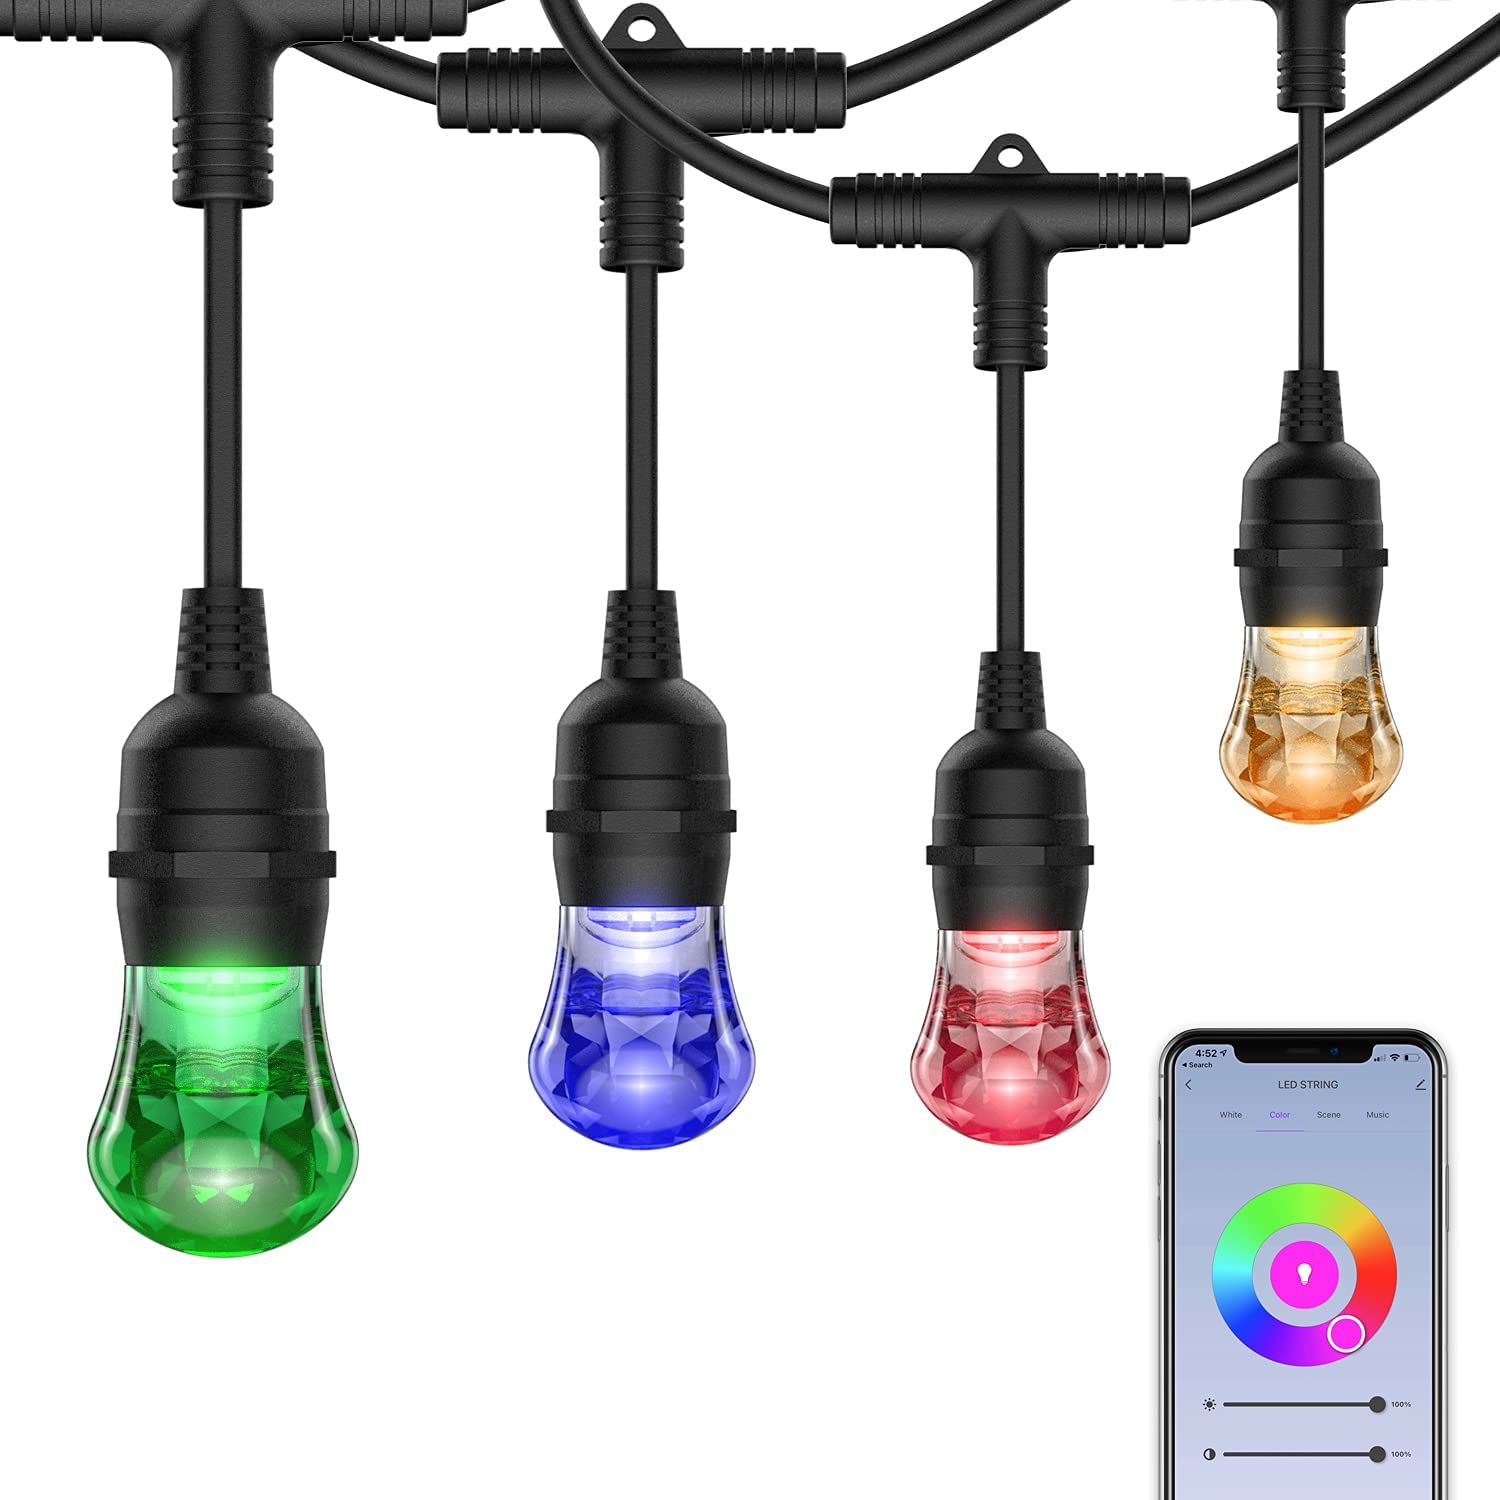 FMART 25ft Smart String Lights Color Changing, Outdoor String Lights RGBW with 8 Shatterproof Acrylic Bulbs, 2.4 GHz Wi-Fi & App Control, Waterproof Hanging String Lights for Backyard Party